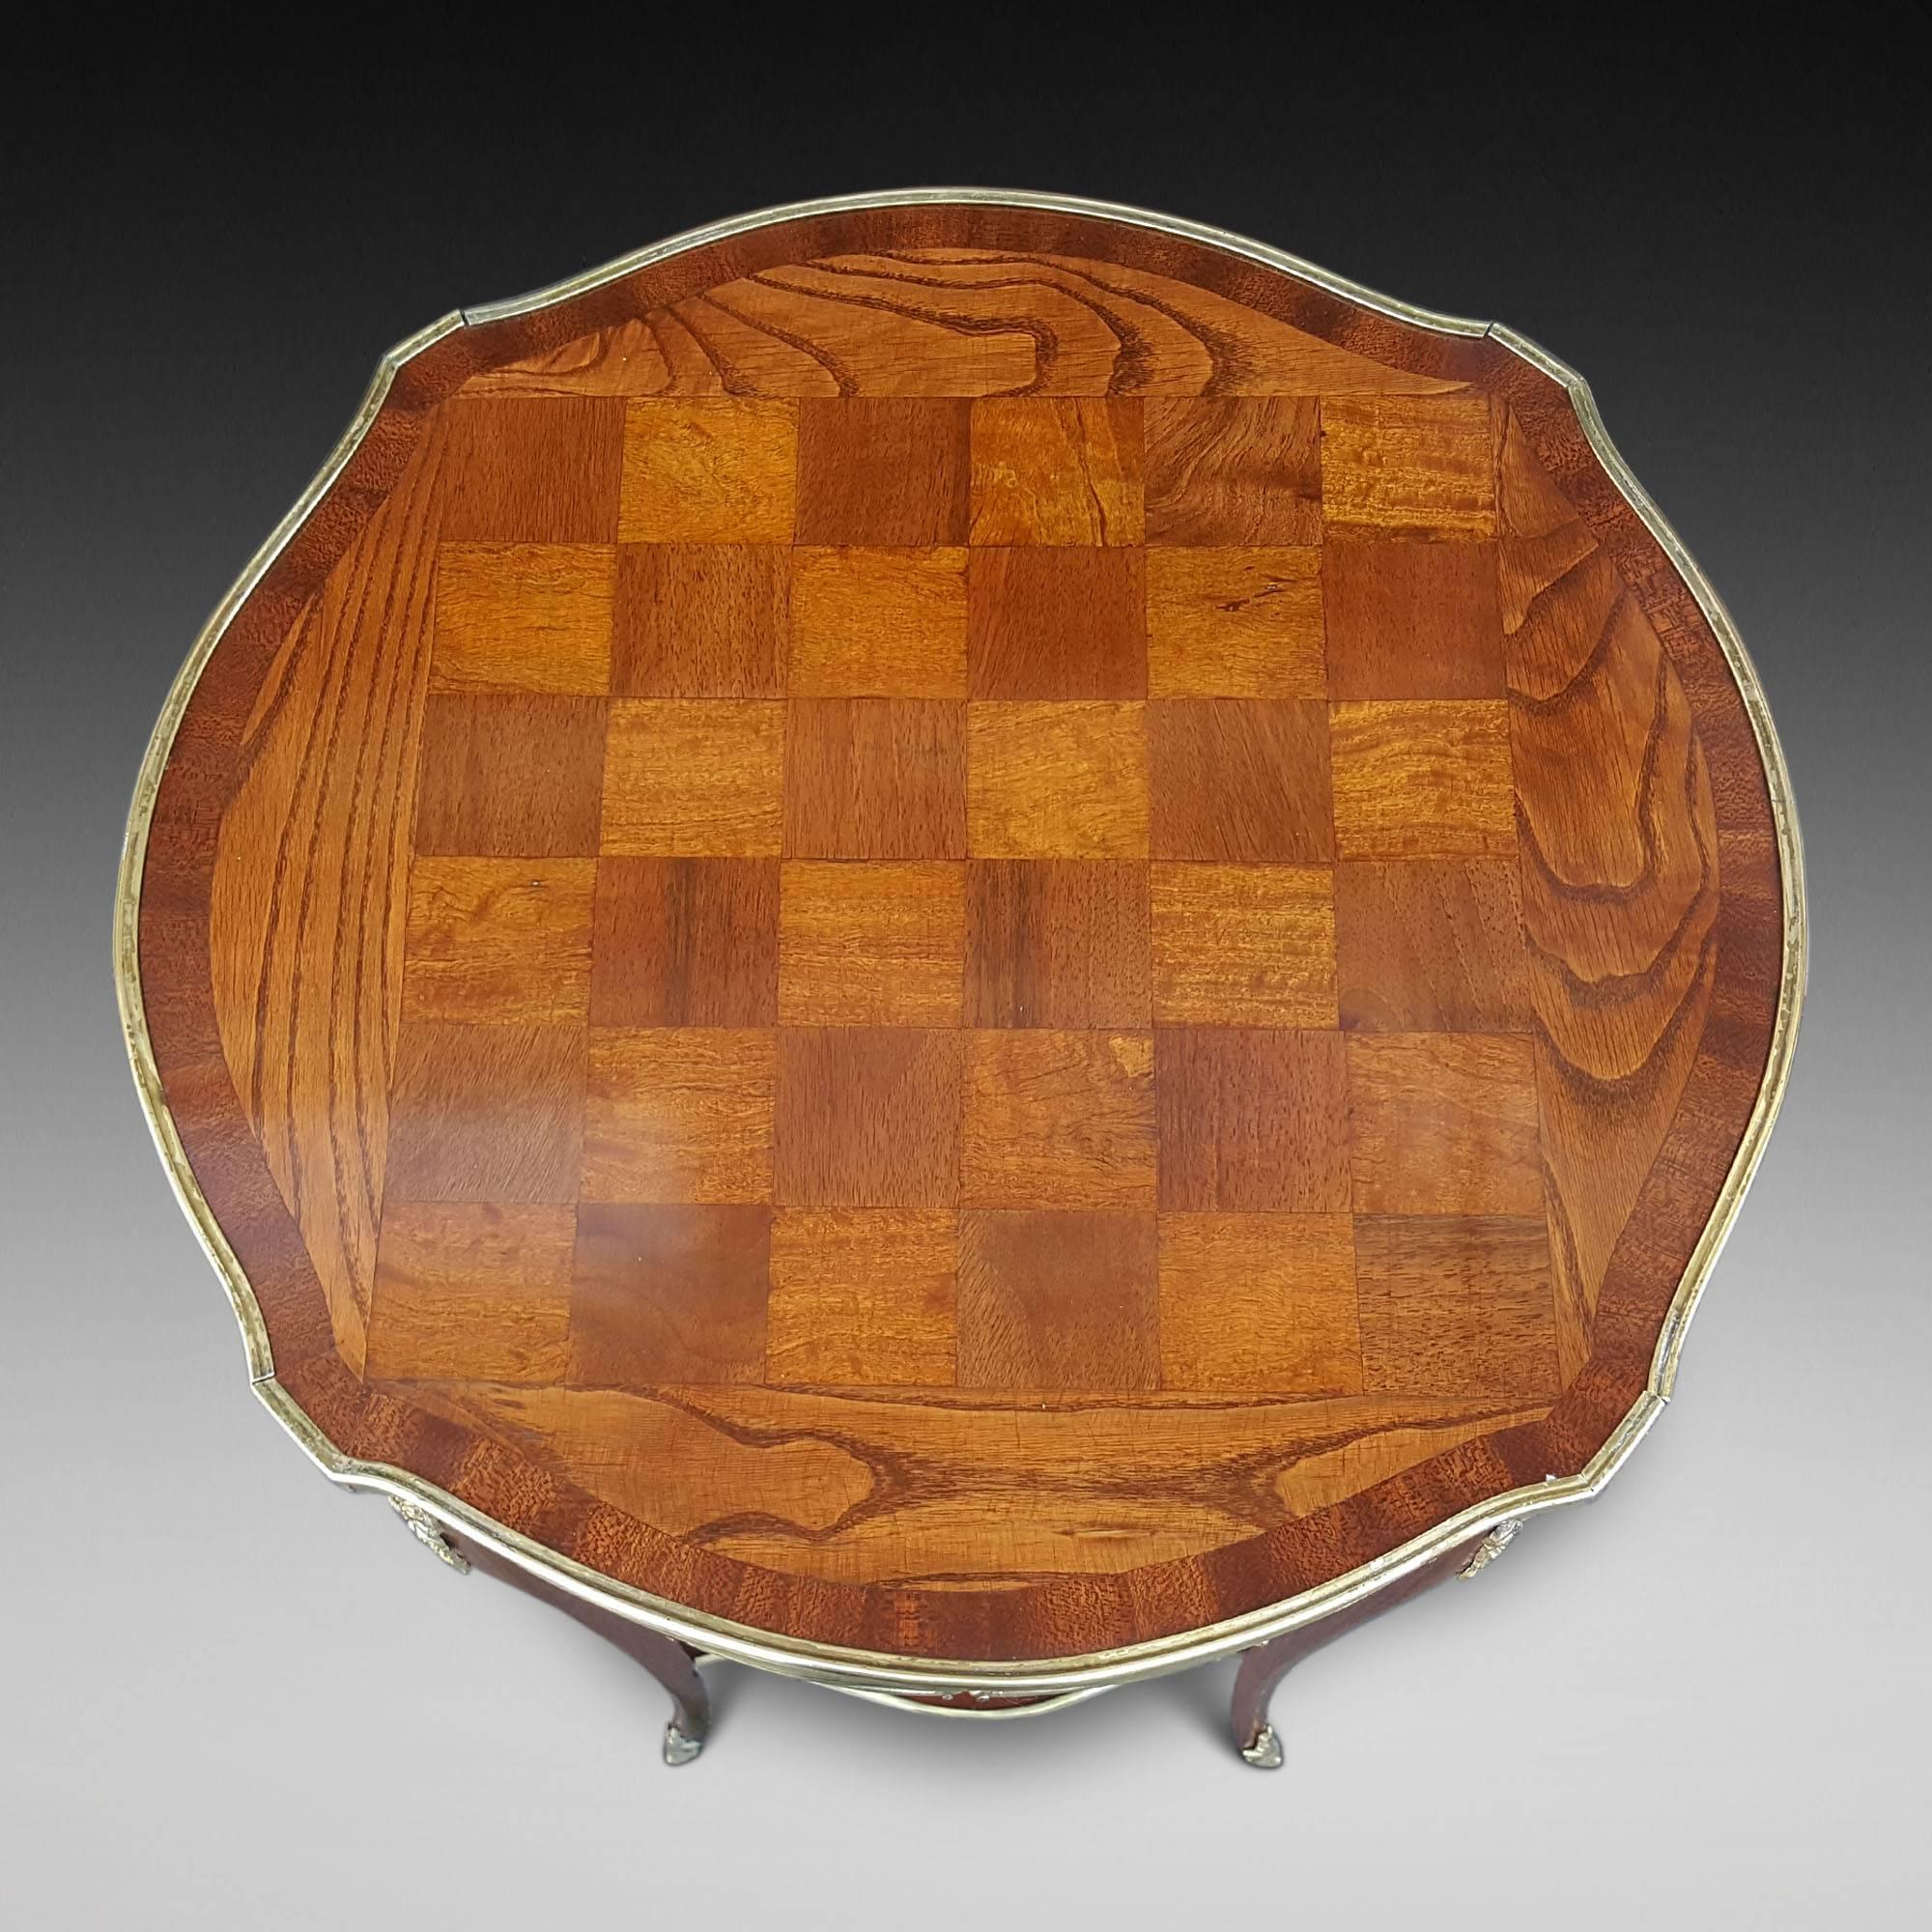 Victorian rosewood and satinwood chess games table, with gilt metal side mounts, cabriole legs and low shelf
Measures: 18